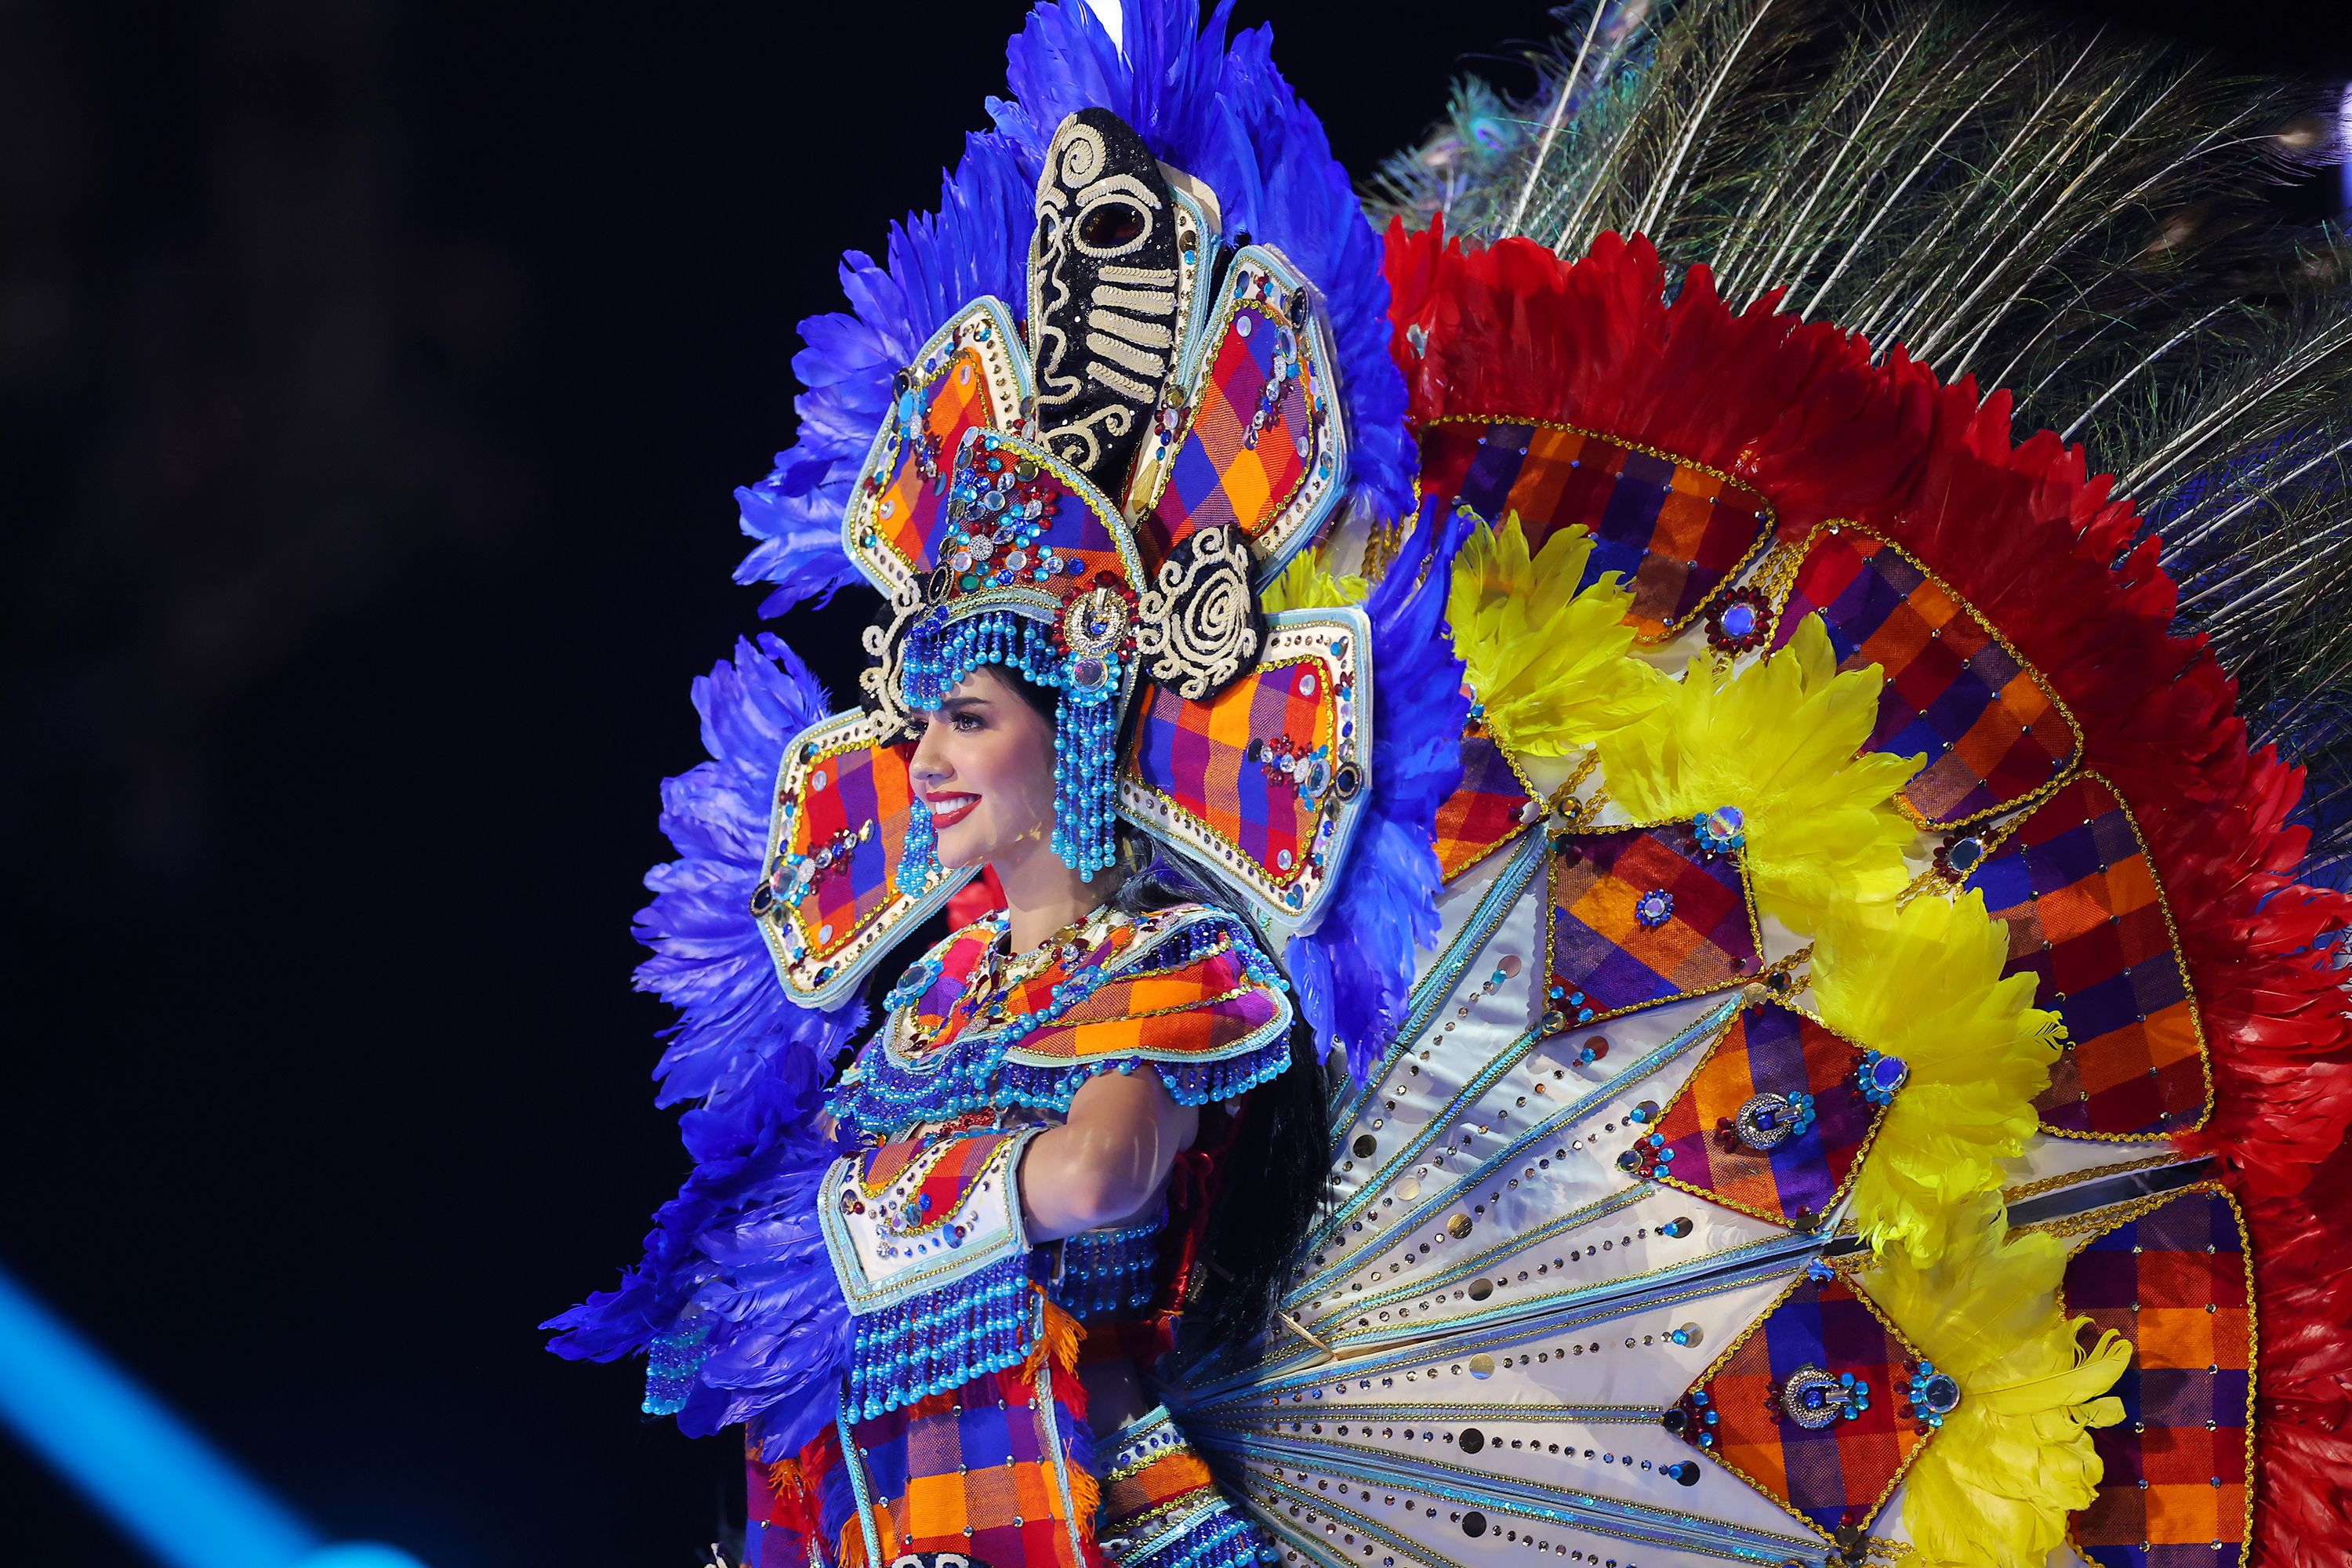 Highlights from the 2023 Miss Universe pageant’s national costume